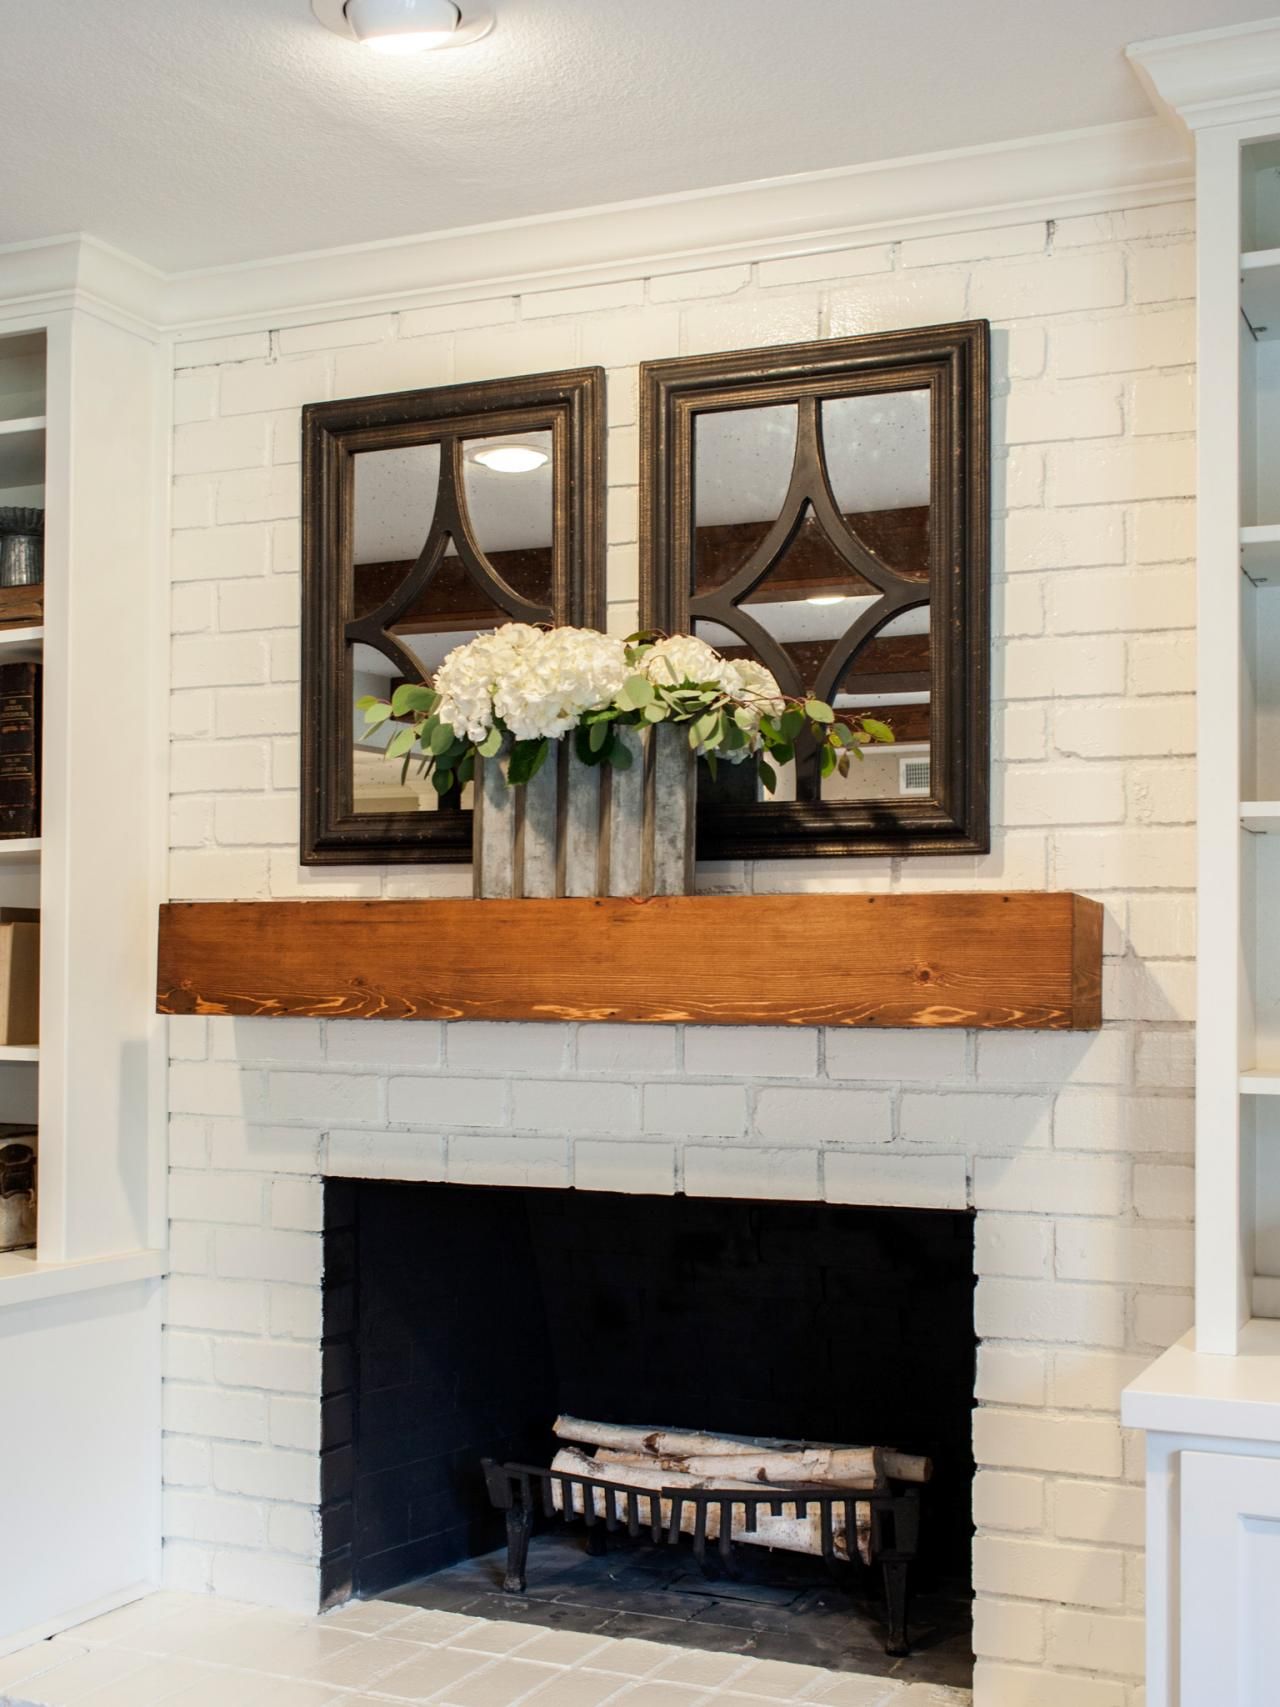 Joanna Gaines Fireplace Mantel Lovely Fixer Upper A Fresh Update for A 1962 "shingle Shack